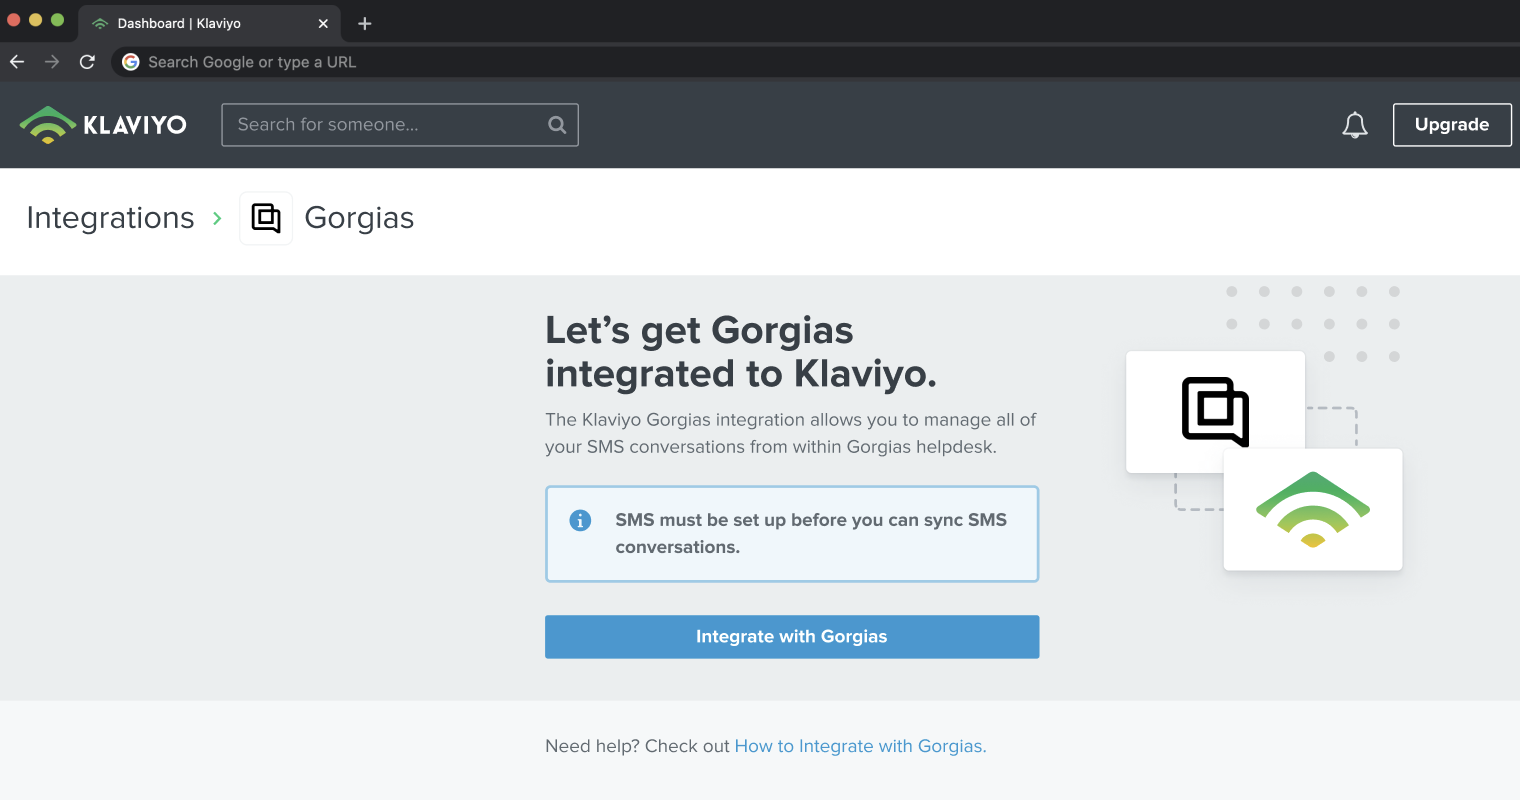 Initial page of Gorgias integration in Klaviyo, with blue button at the bottom to begin integration